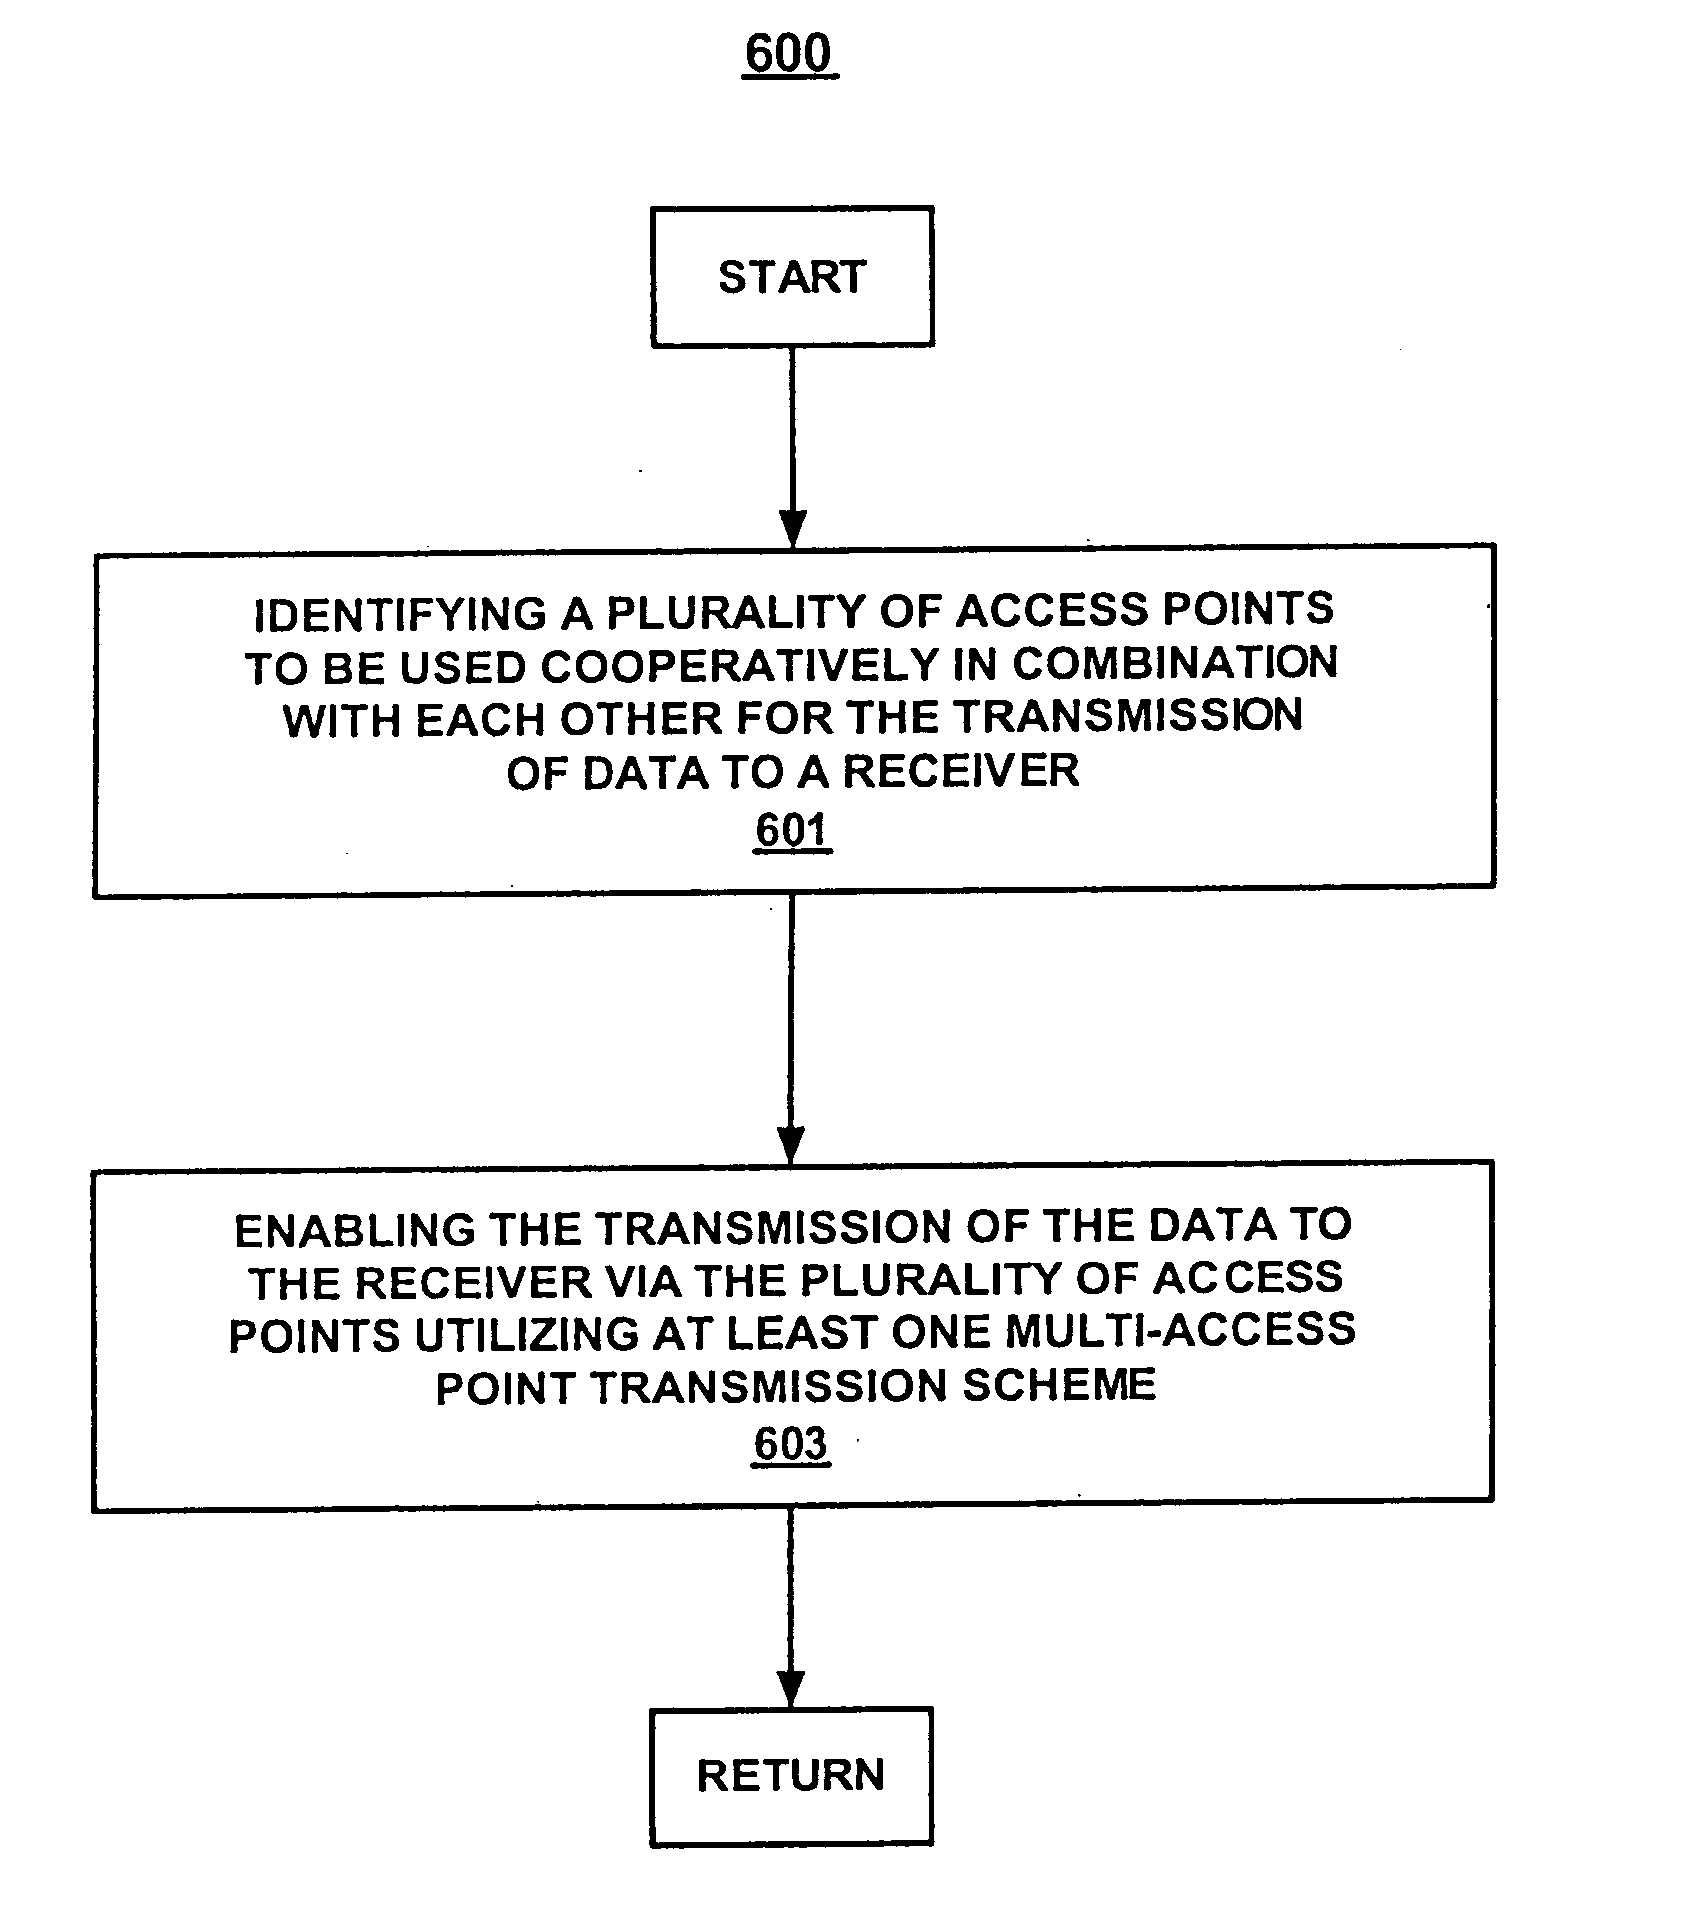 Systems and methods for multi-access point transmission of data using a plurality of access points